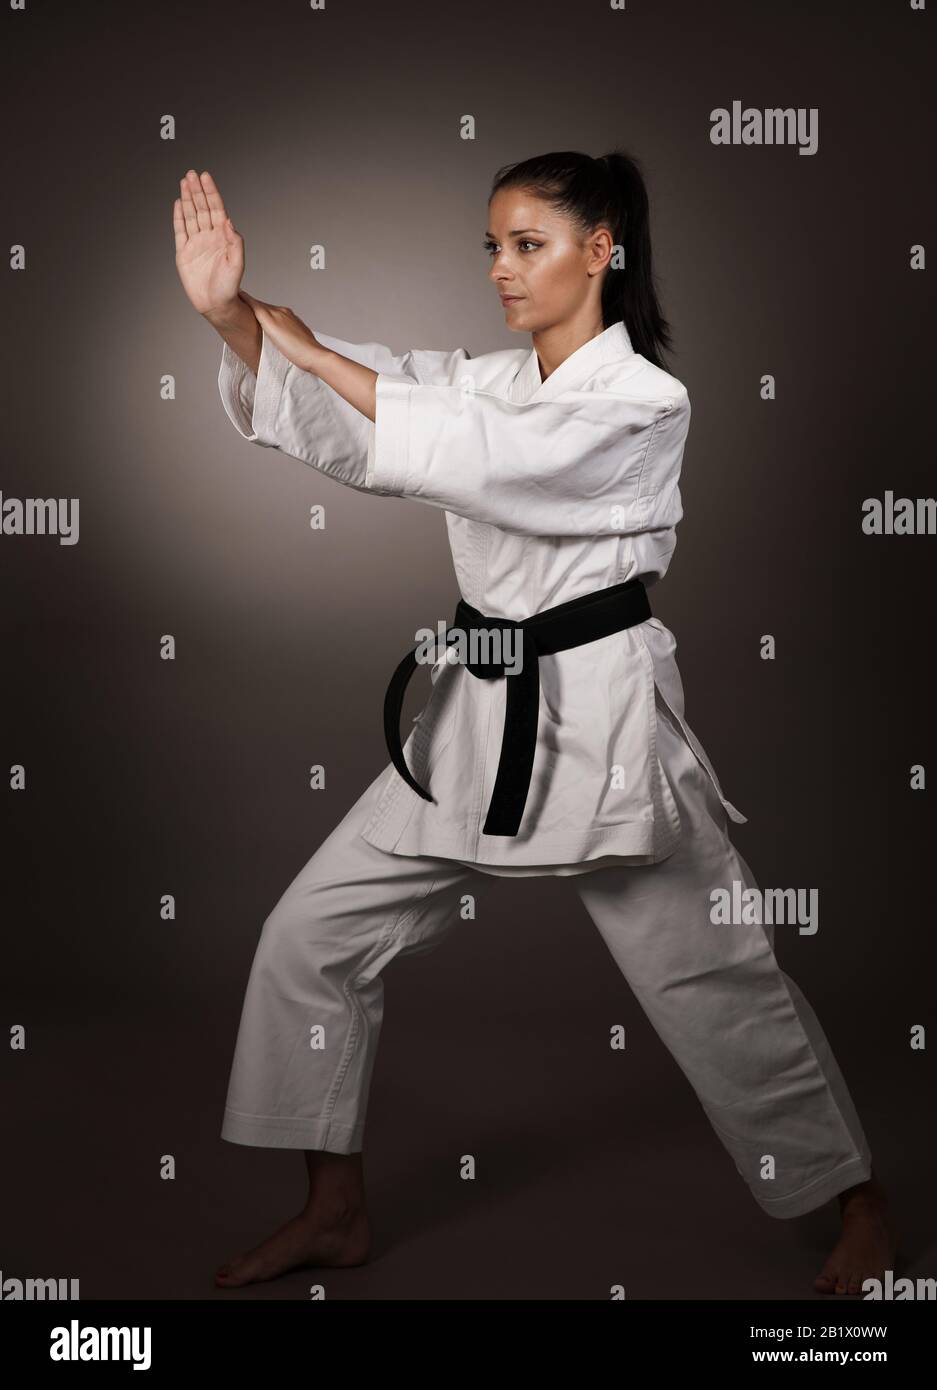 Woman in white  kimono punch hard in the air -  a karate martial art girl Stock Photo